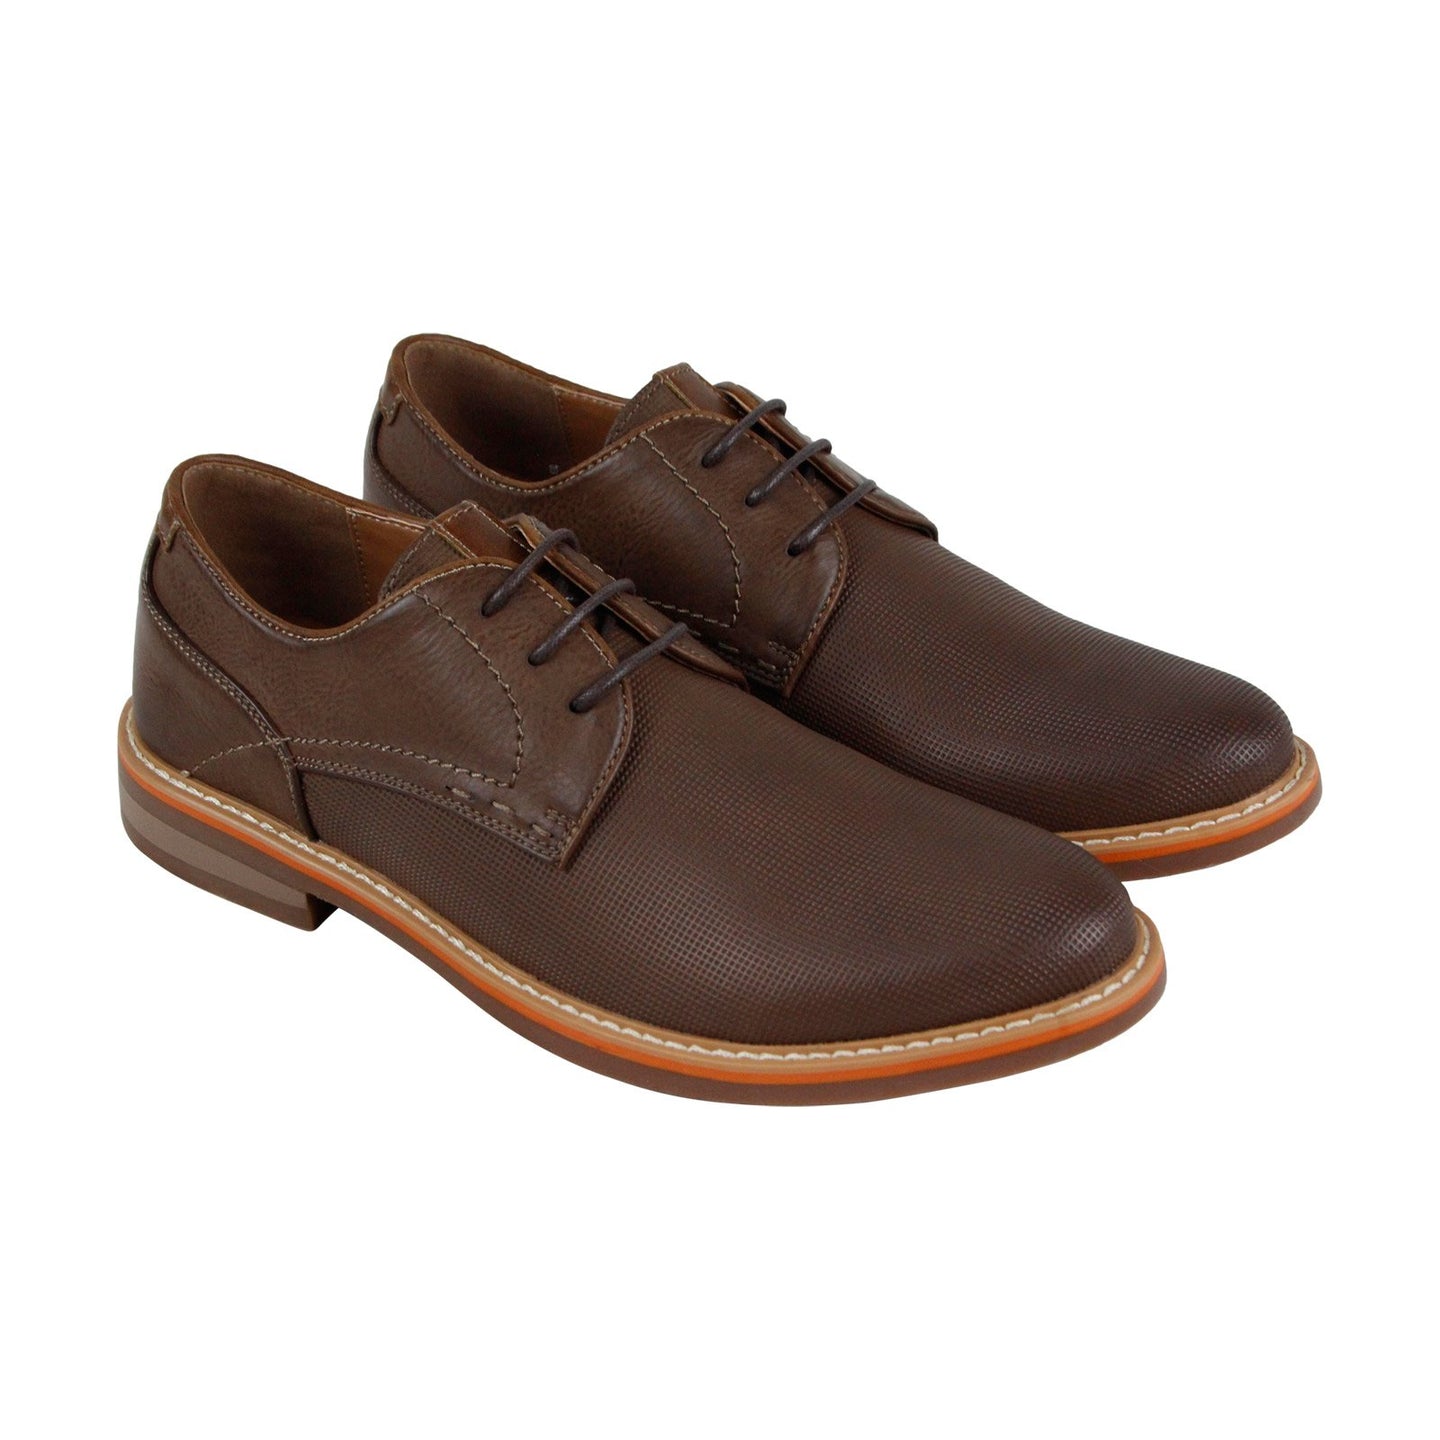 Steve Madden Olivyr Mens Brown Leather Lace Up Plain Toe Oxfords Shoes ...